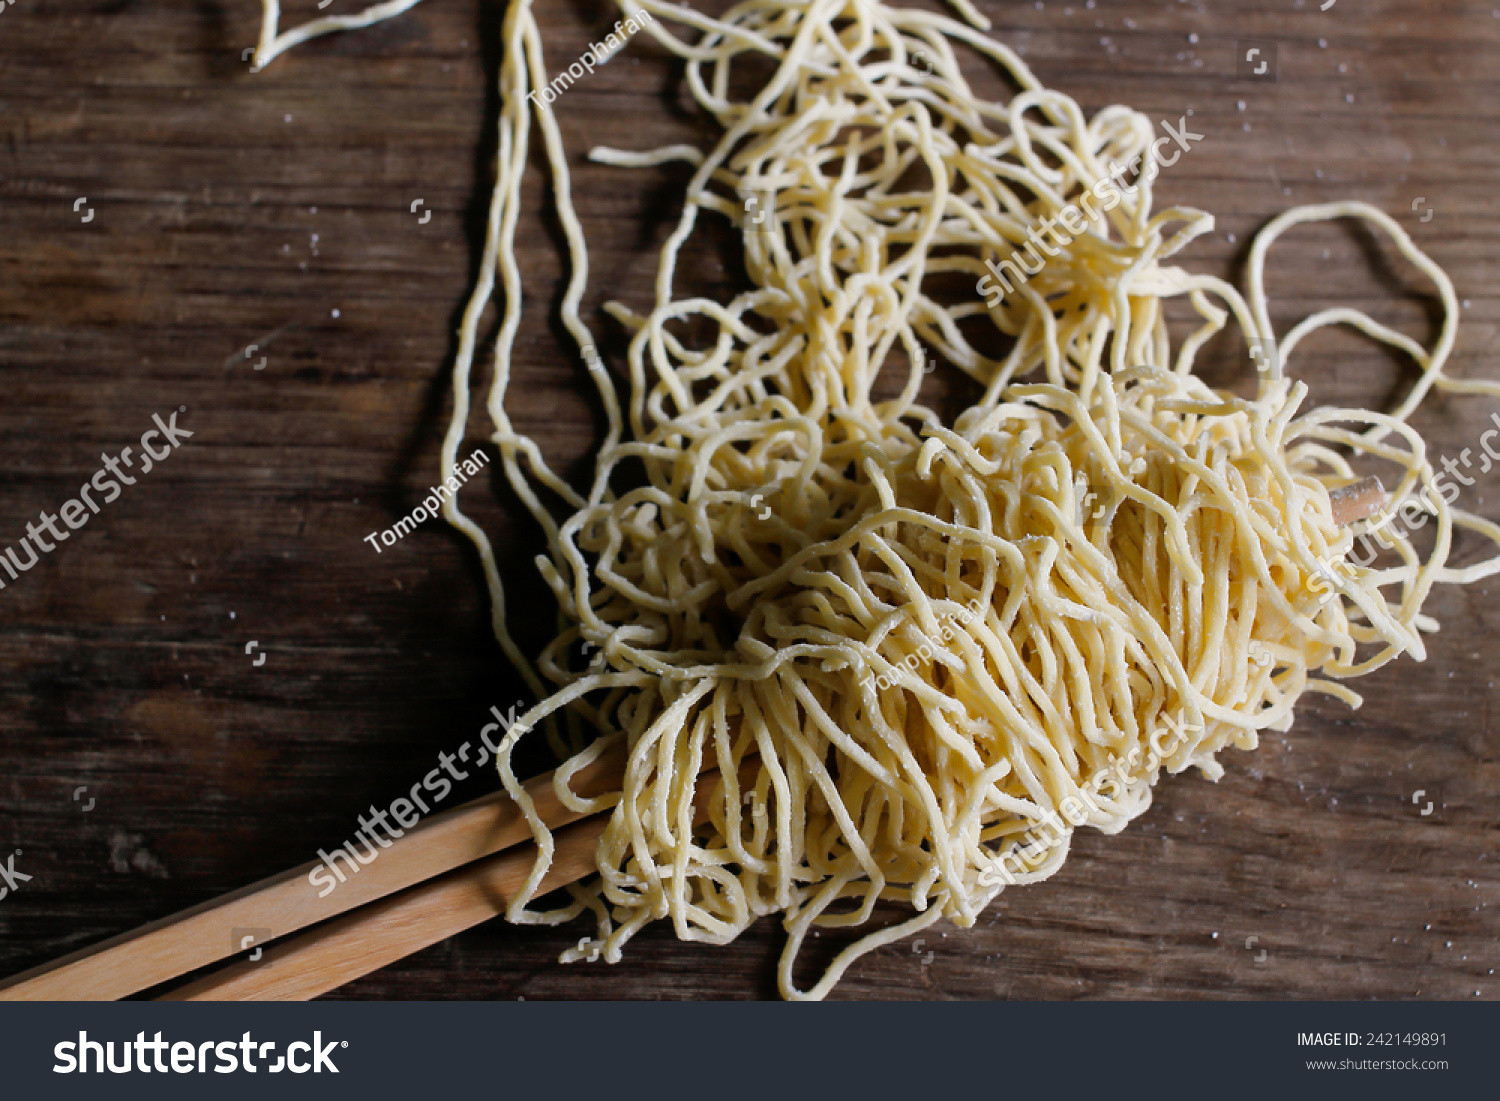 Chinese Thin Noodles
 Chinese Food Thin Egg Noodles Stock